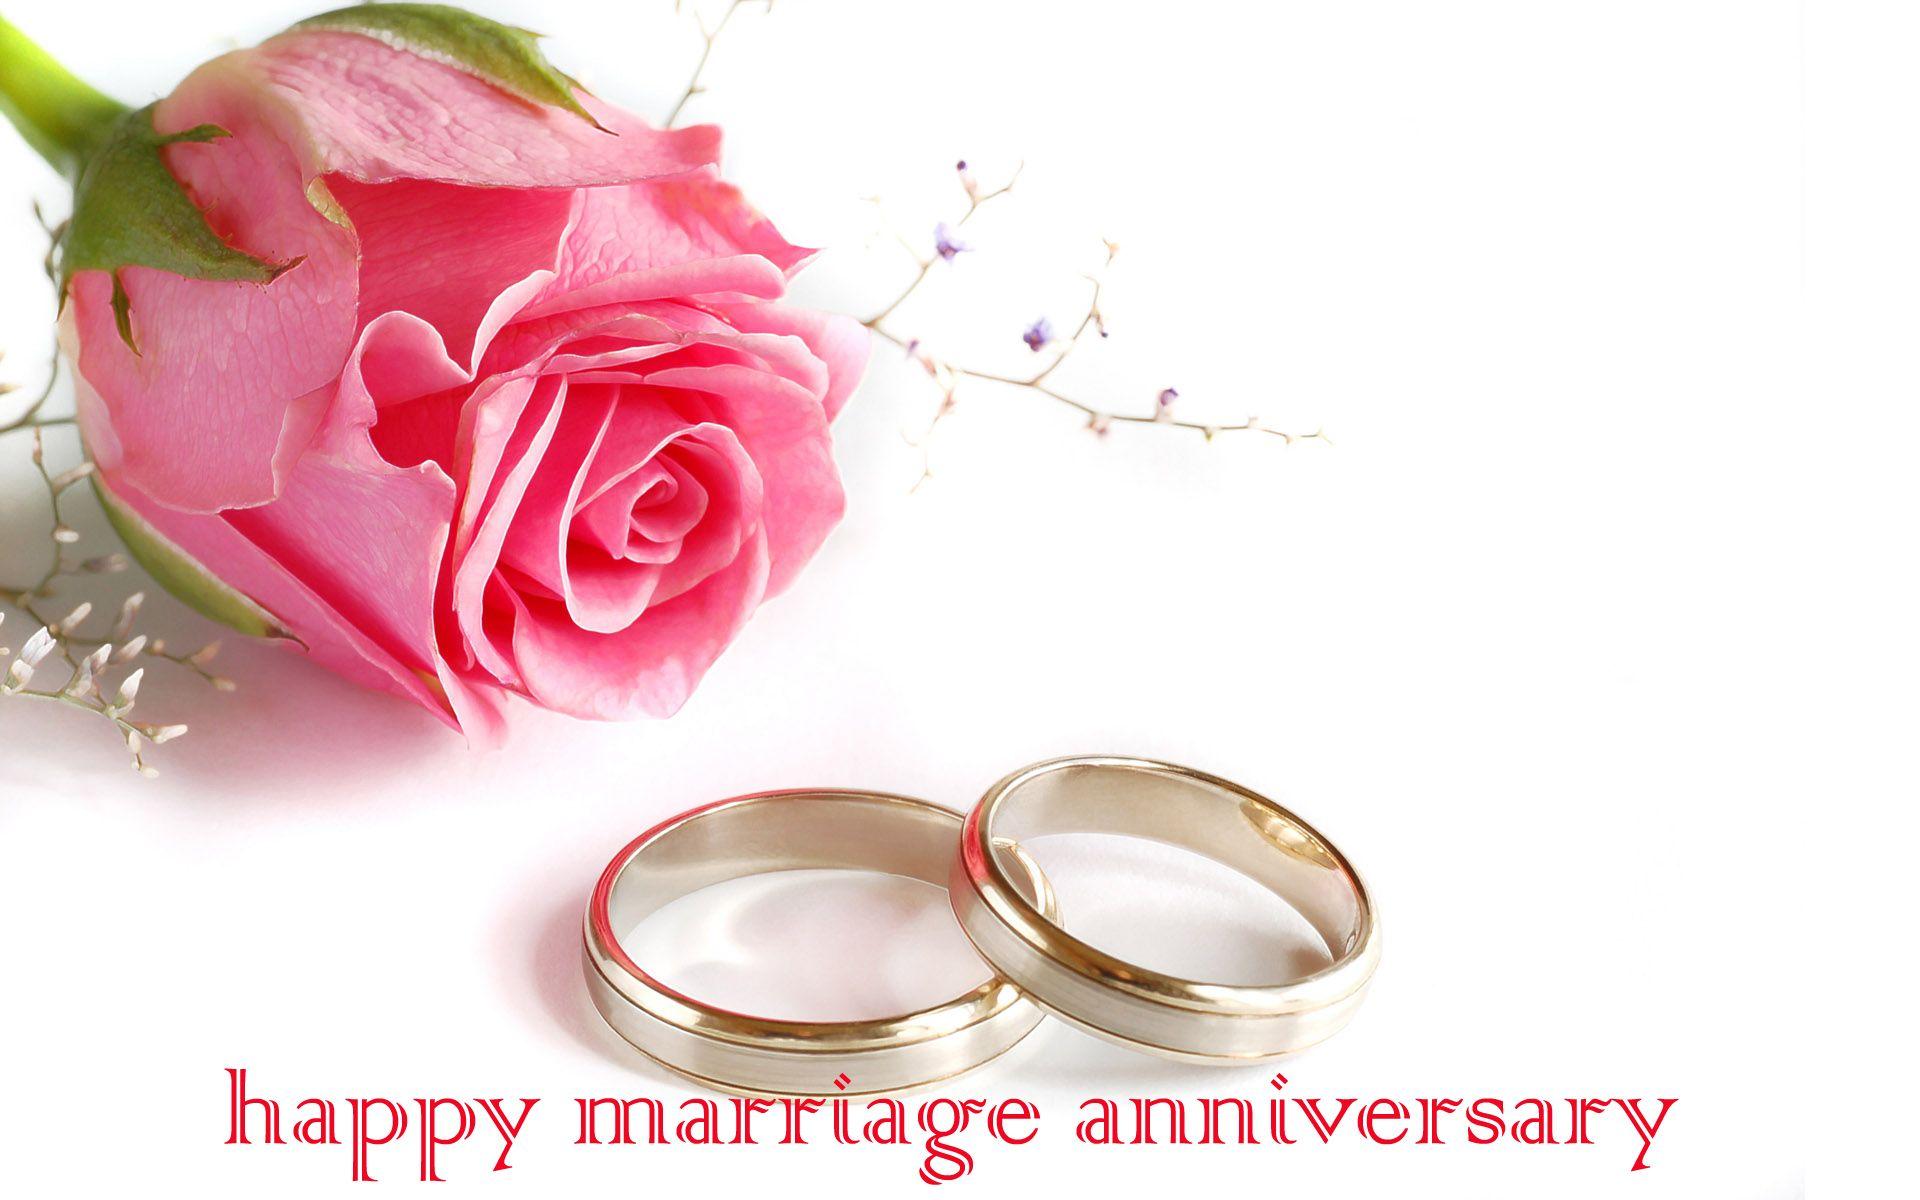 Wedding Anniversary Wishes HD Wallpaper And Image Free Download